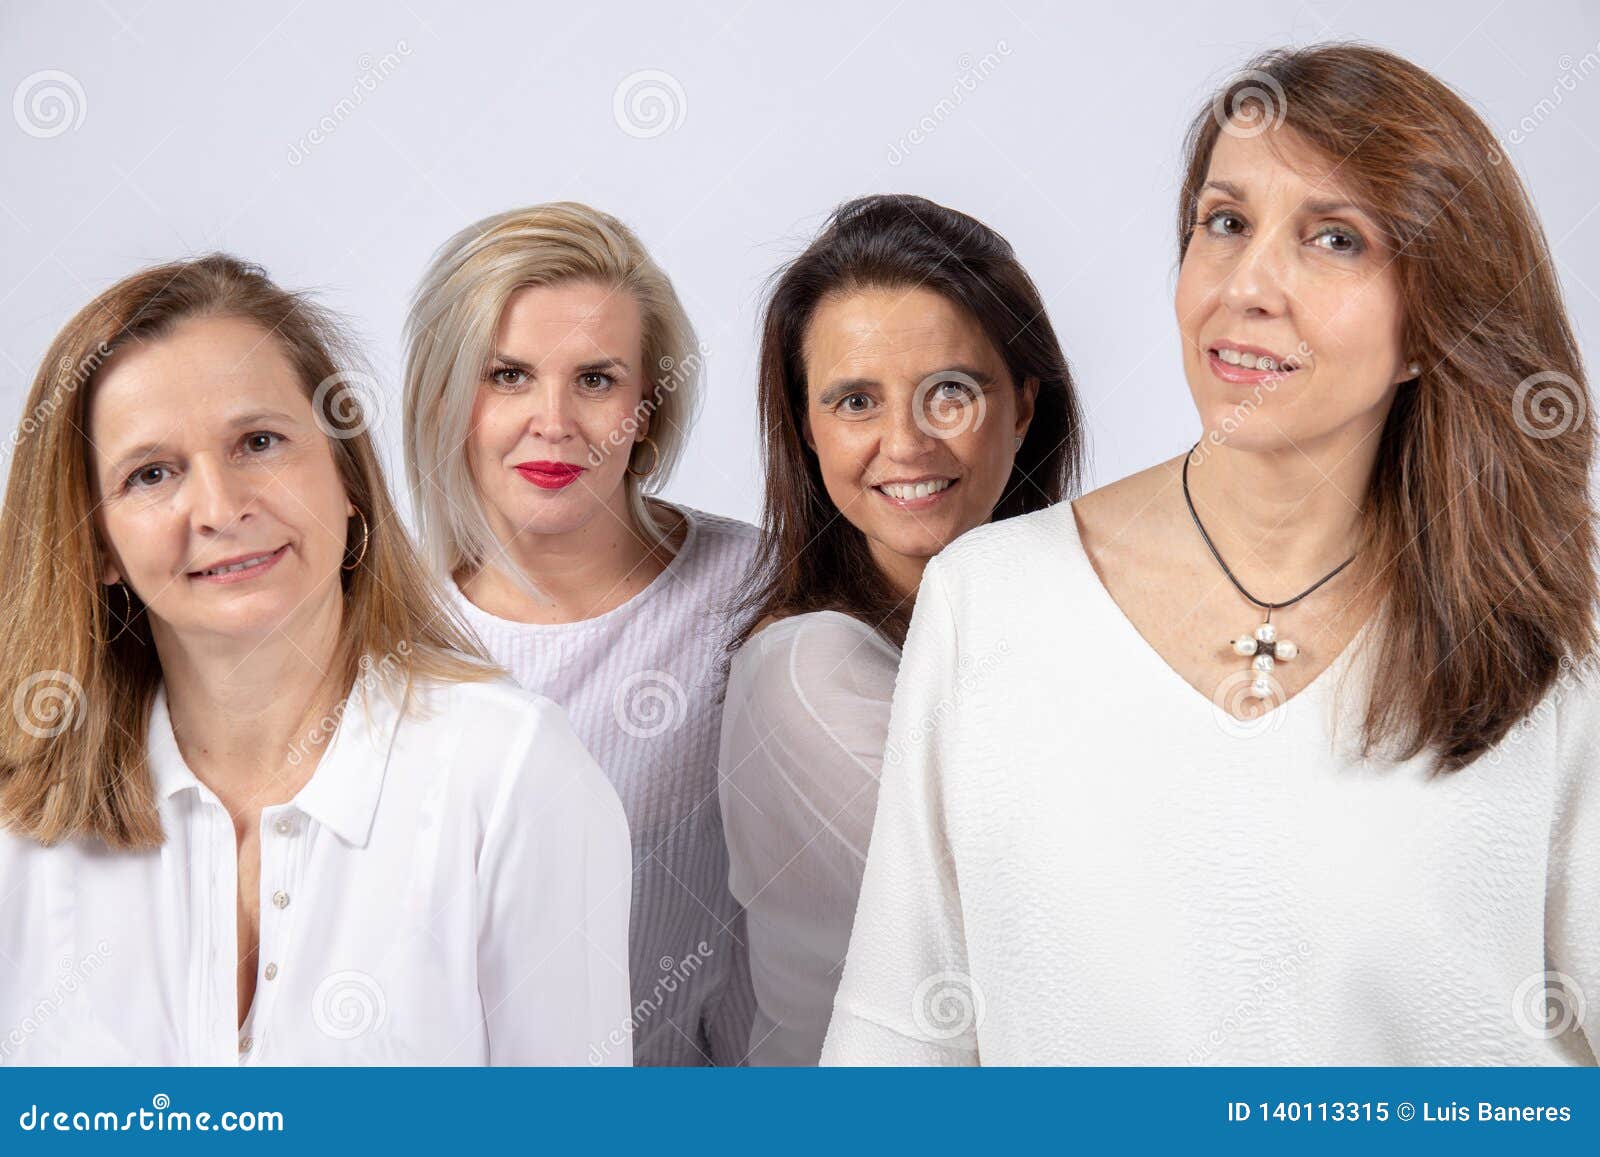 Photo Session For Female Friends Stock Image Image Of Gorgeous